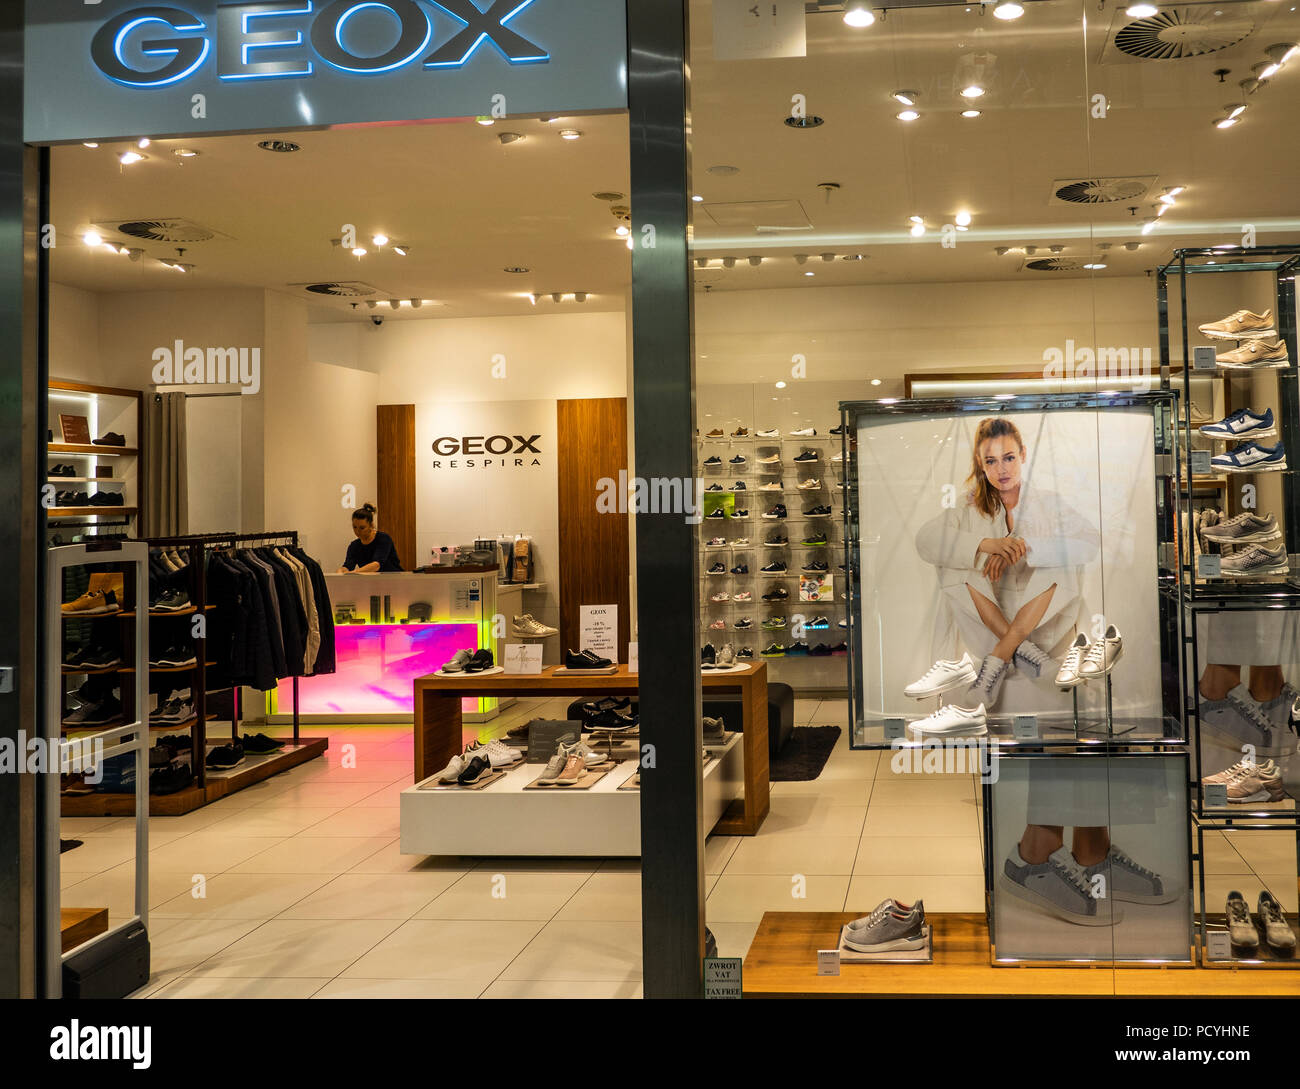 Geox Shoes High Resolution Stock Photography and Images - Alamy